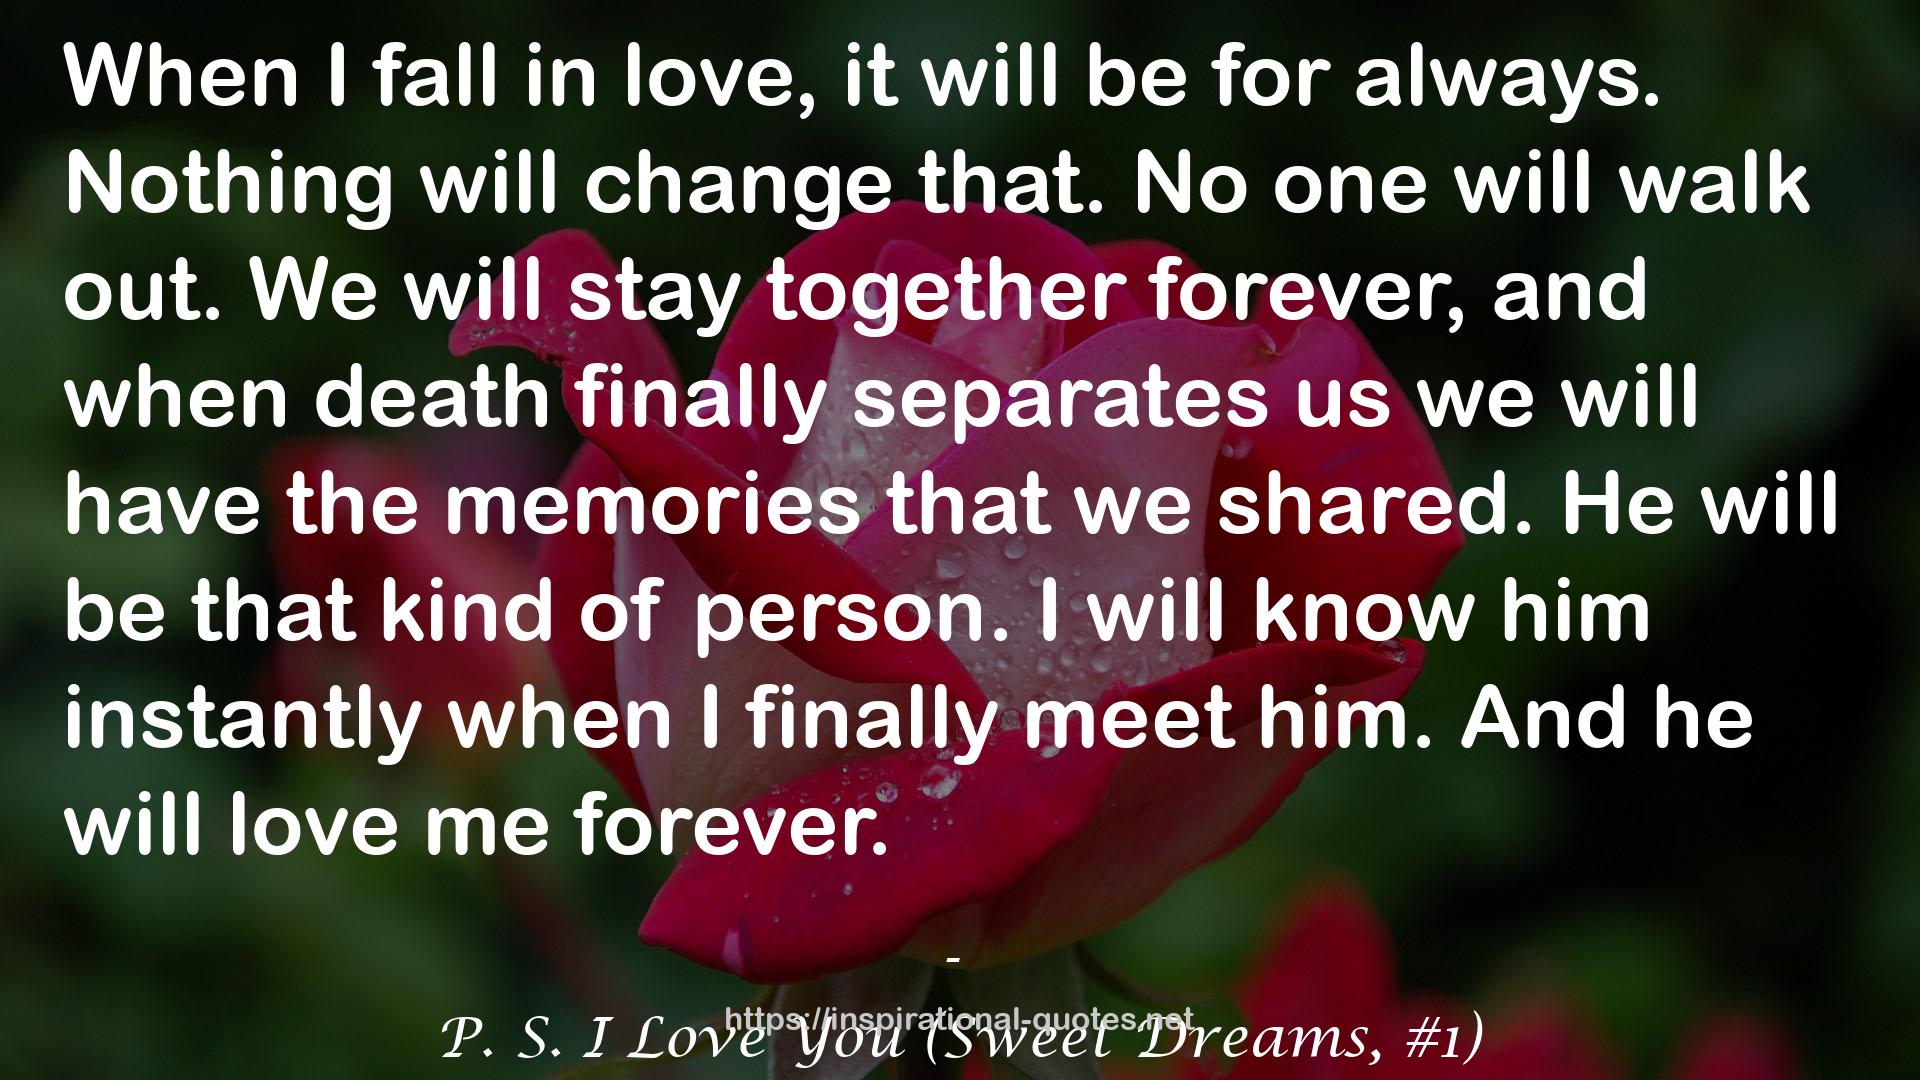 P. S. I Love You (Sweet Dreams, #1) QUOTES